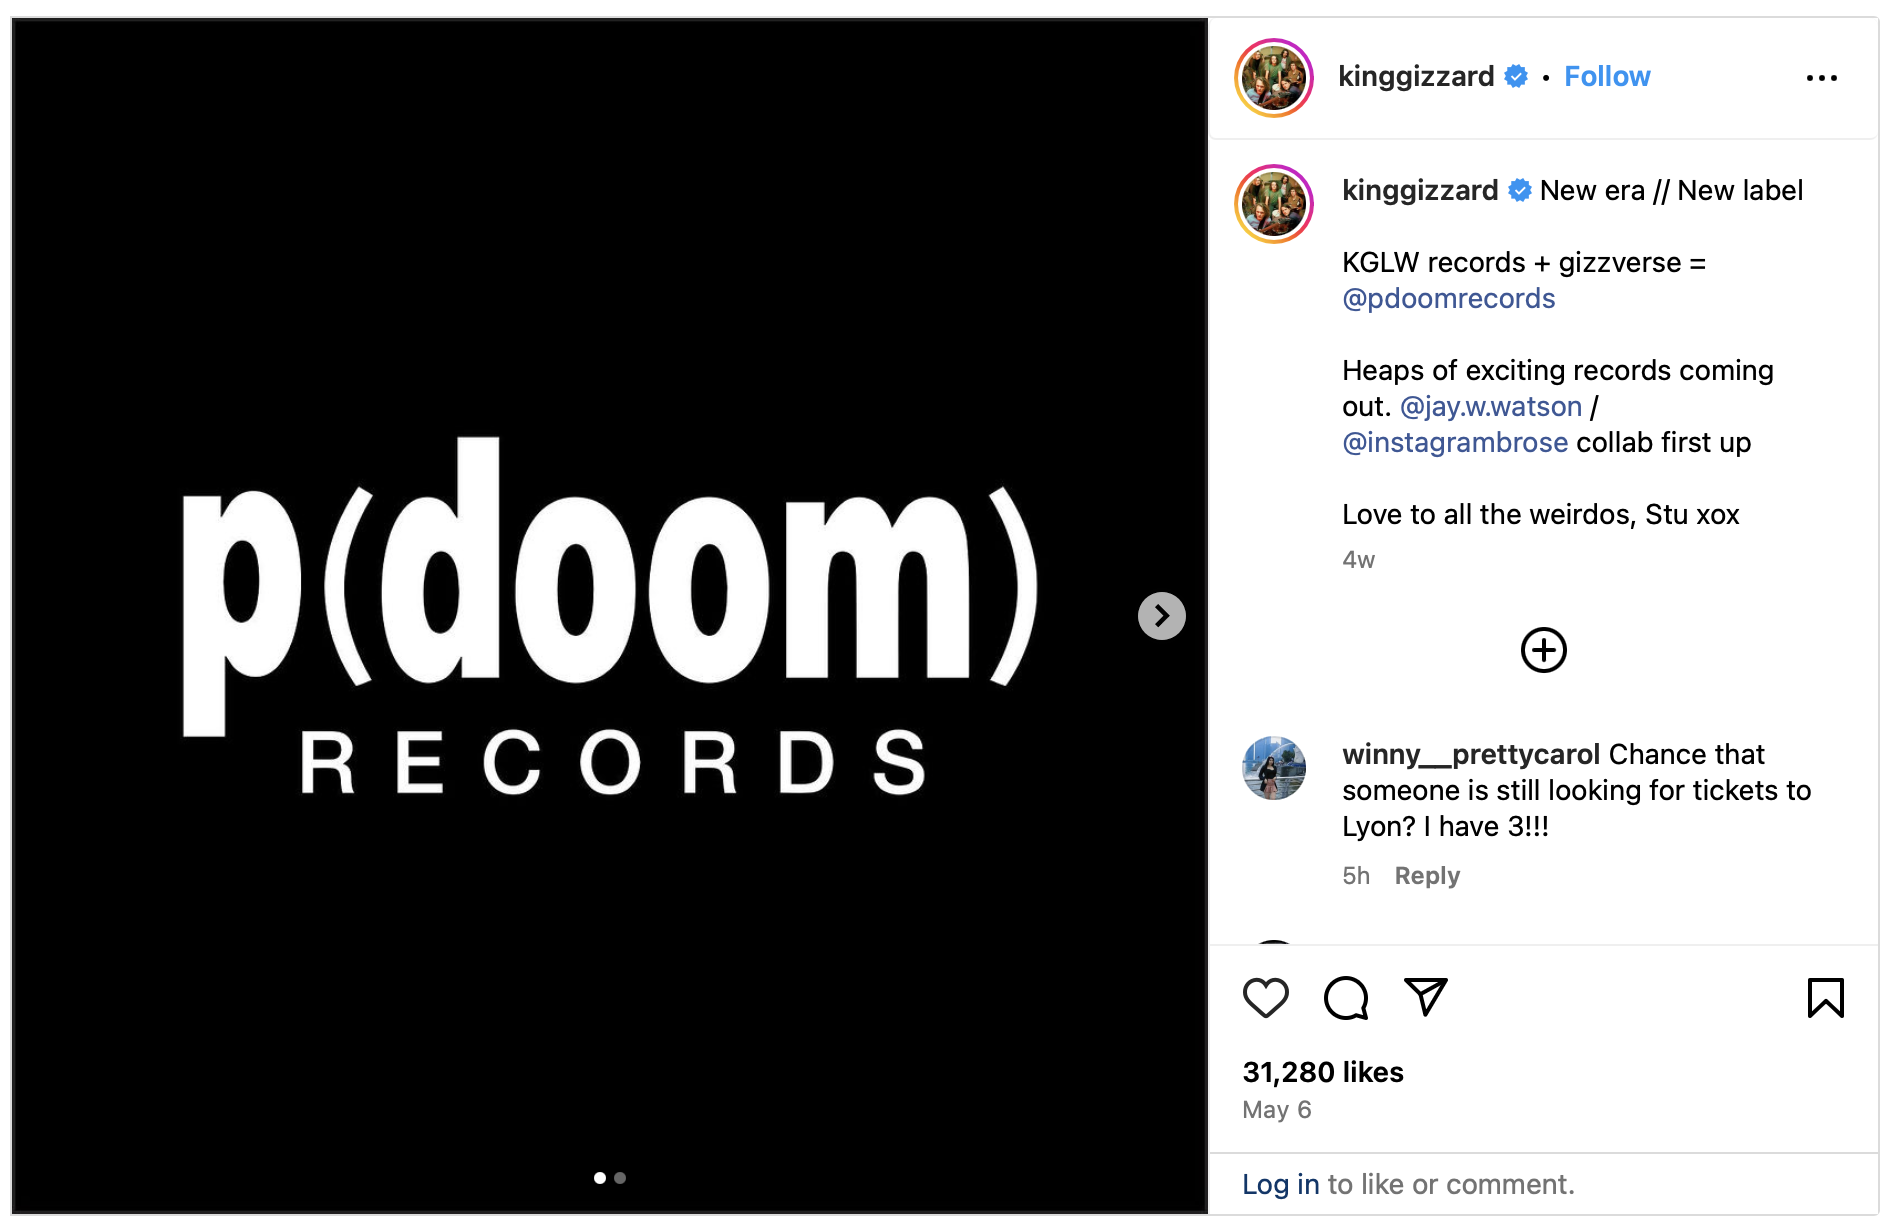 A screenshot of an Instagram post announcing p(doom) with the logo in white text on a black background.